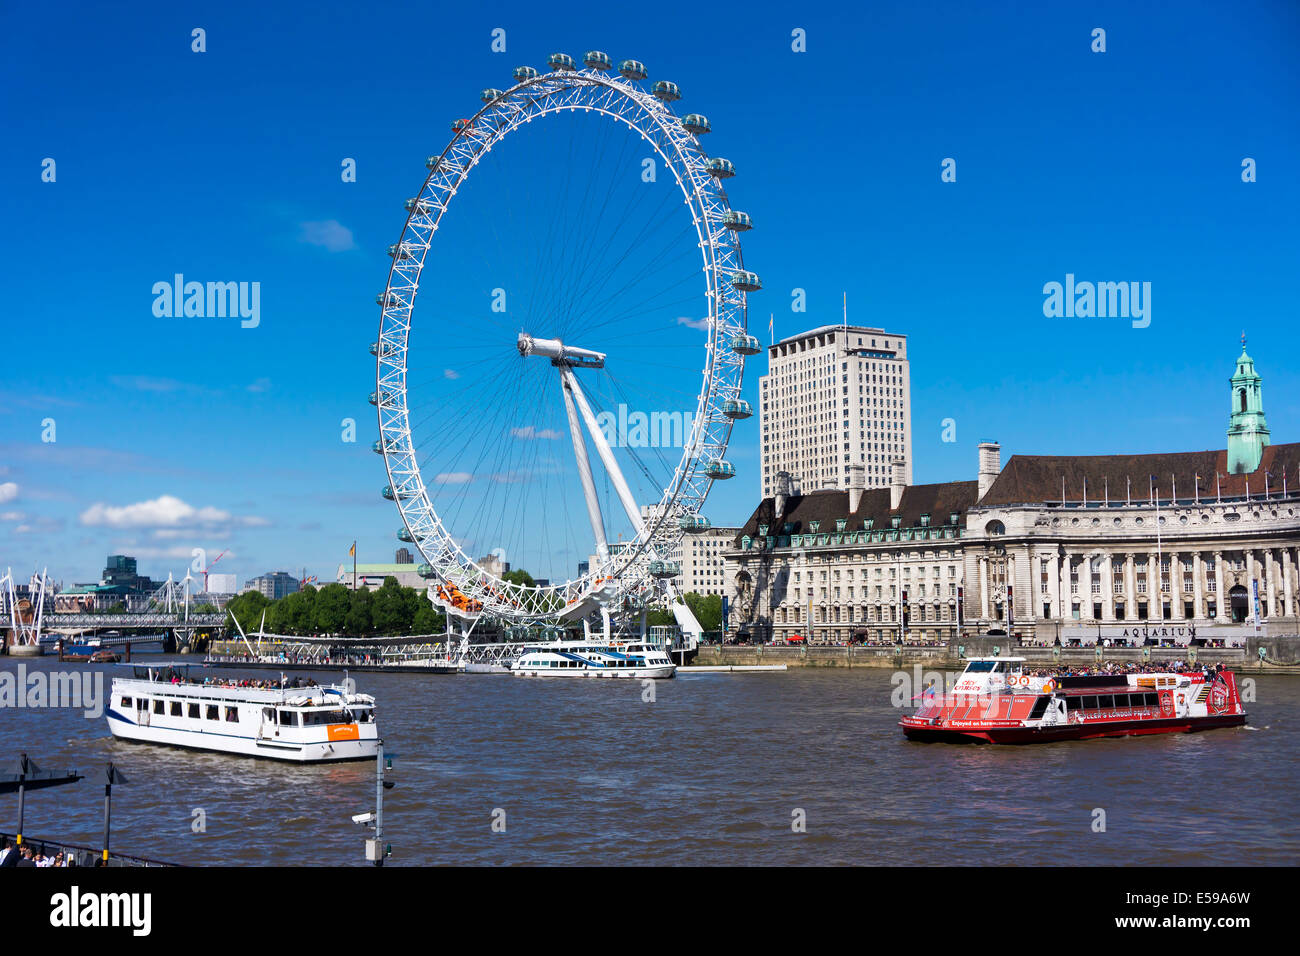 England, London, Lambeth, view to the big wheel 'London Eye' with River Themse in the foreground Stock Photo